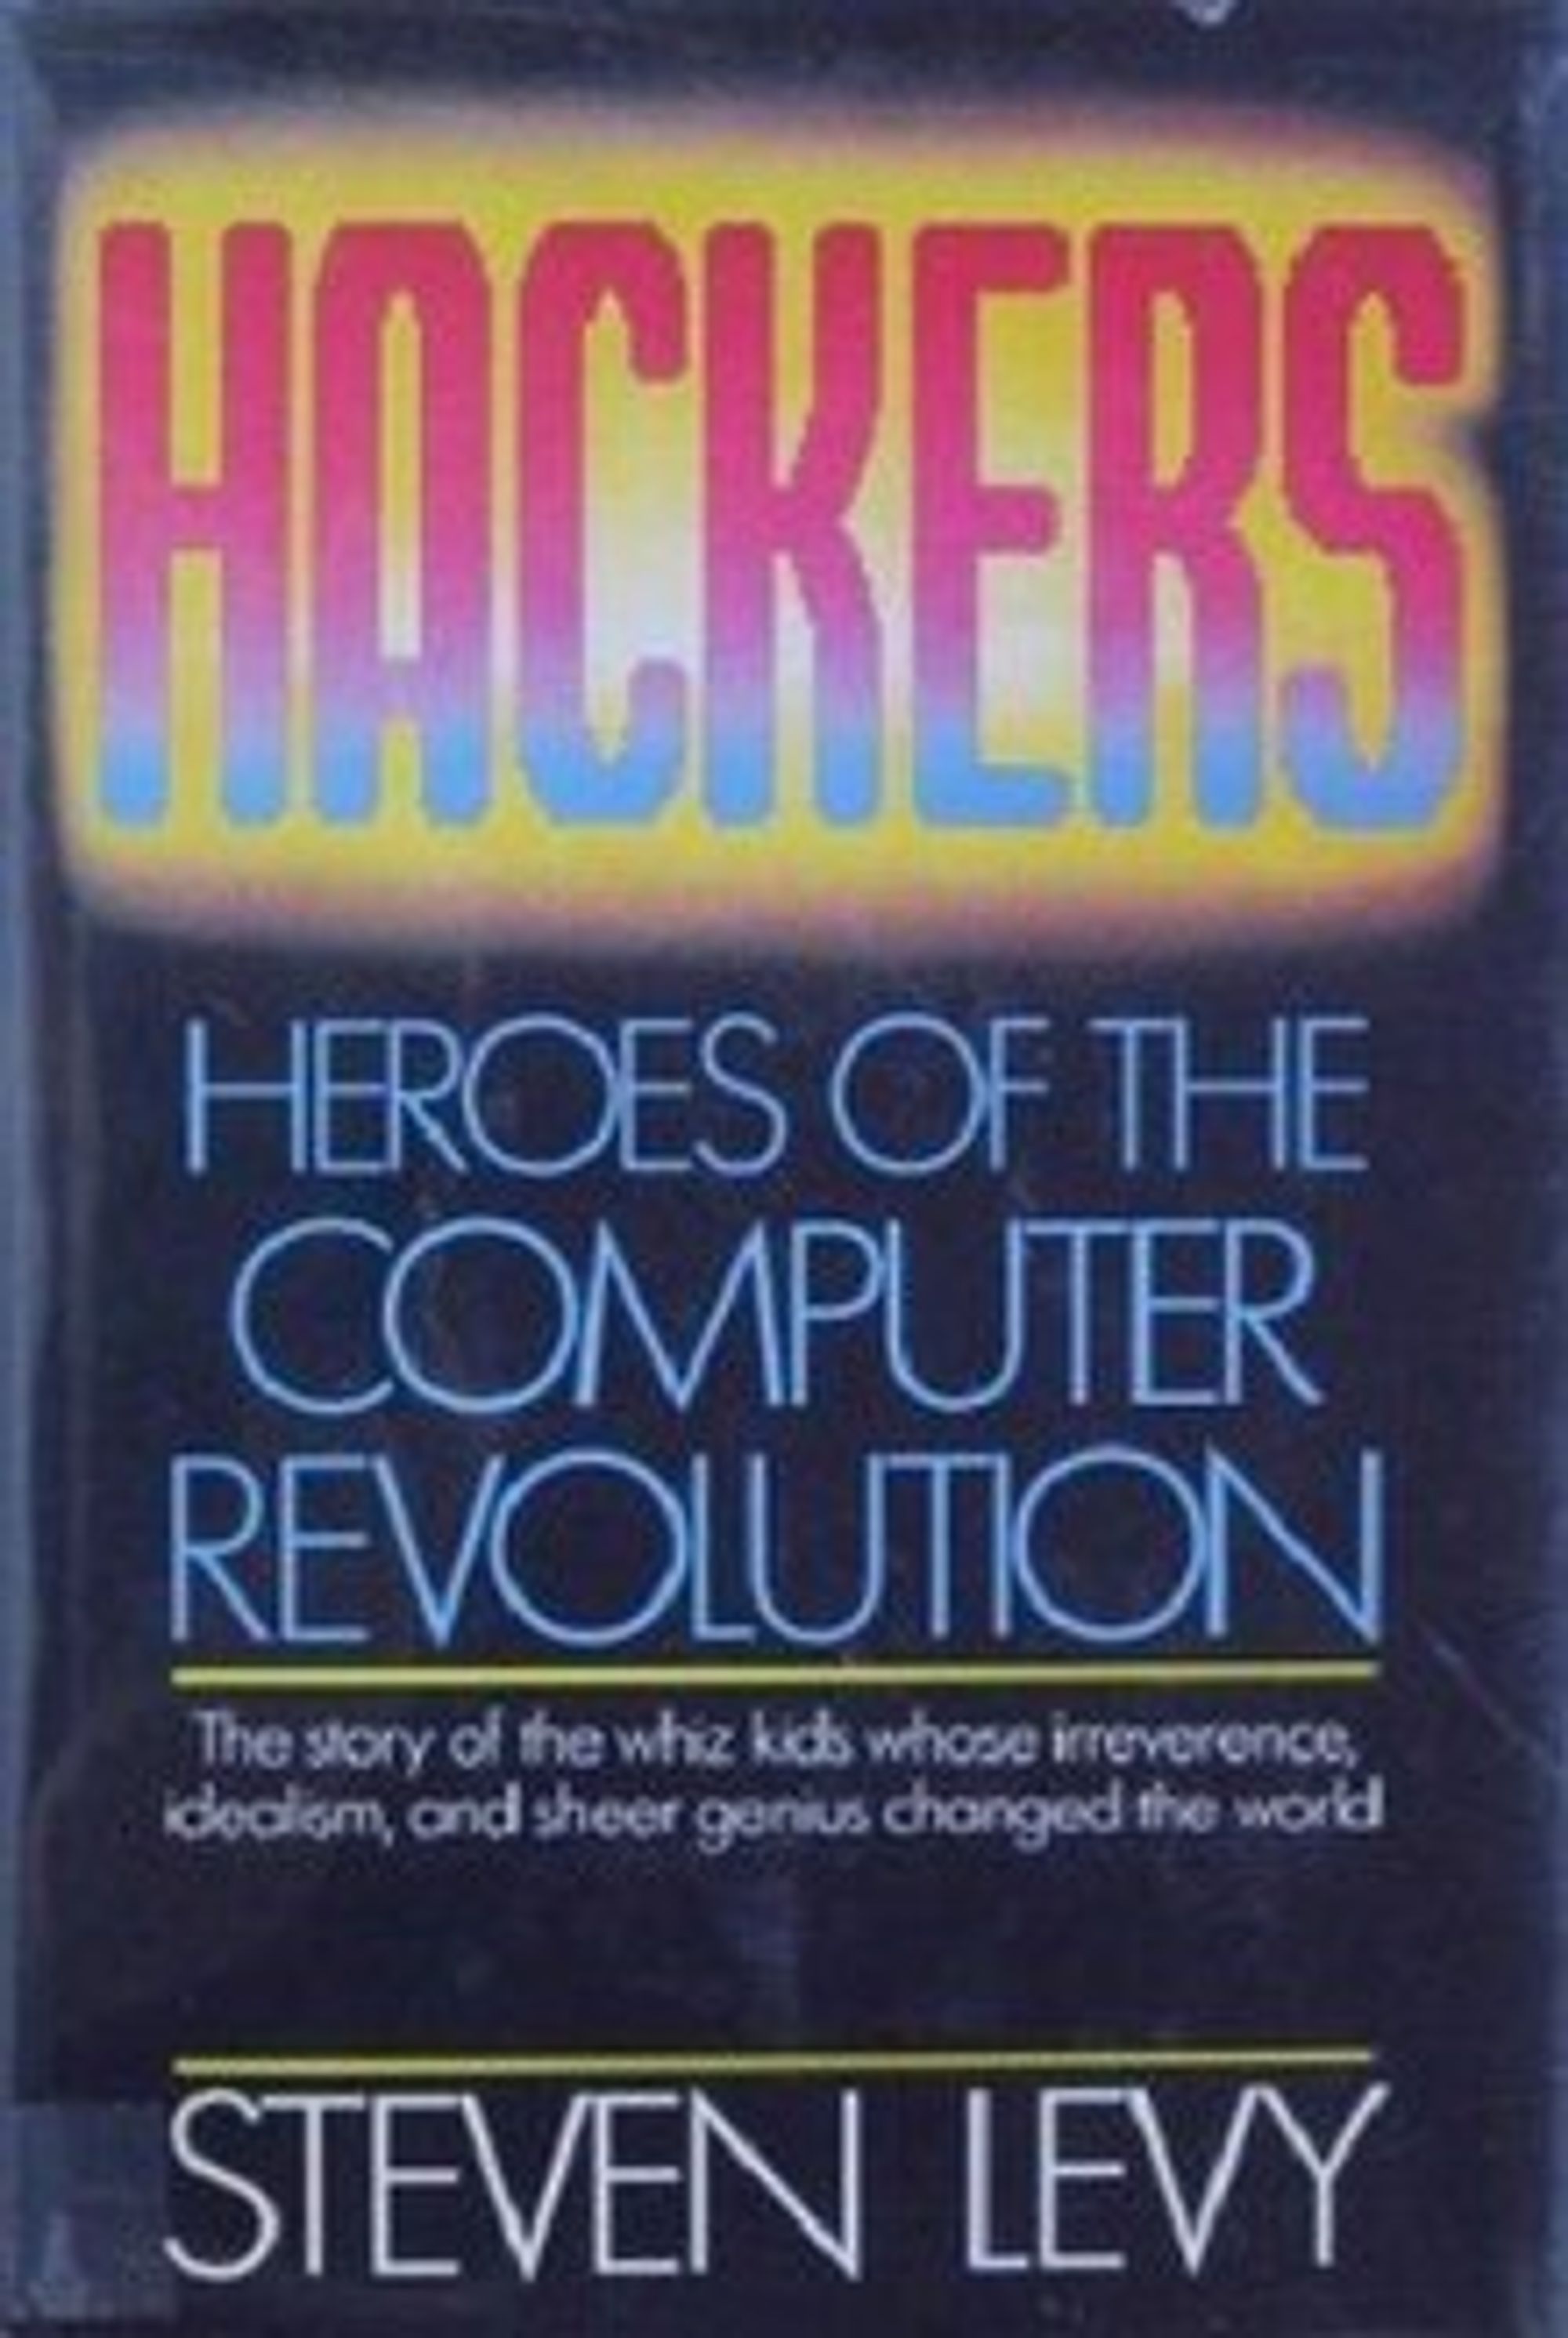 Hackers: Heroes of the Computer Revolution - Wikipedia